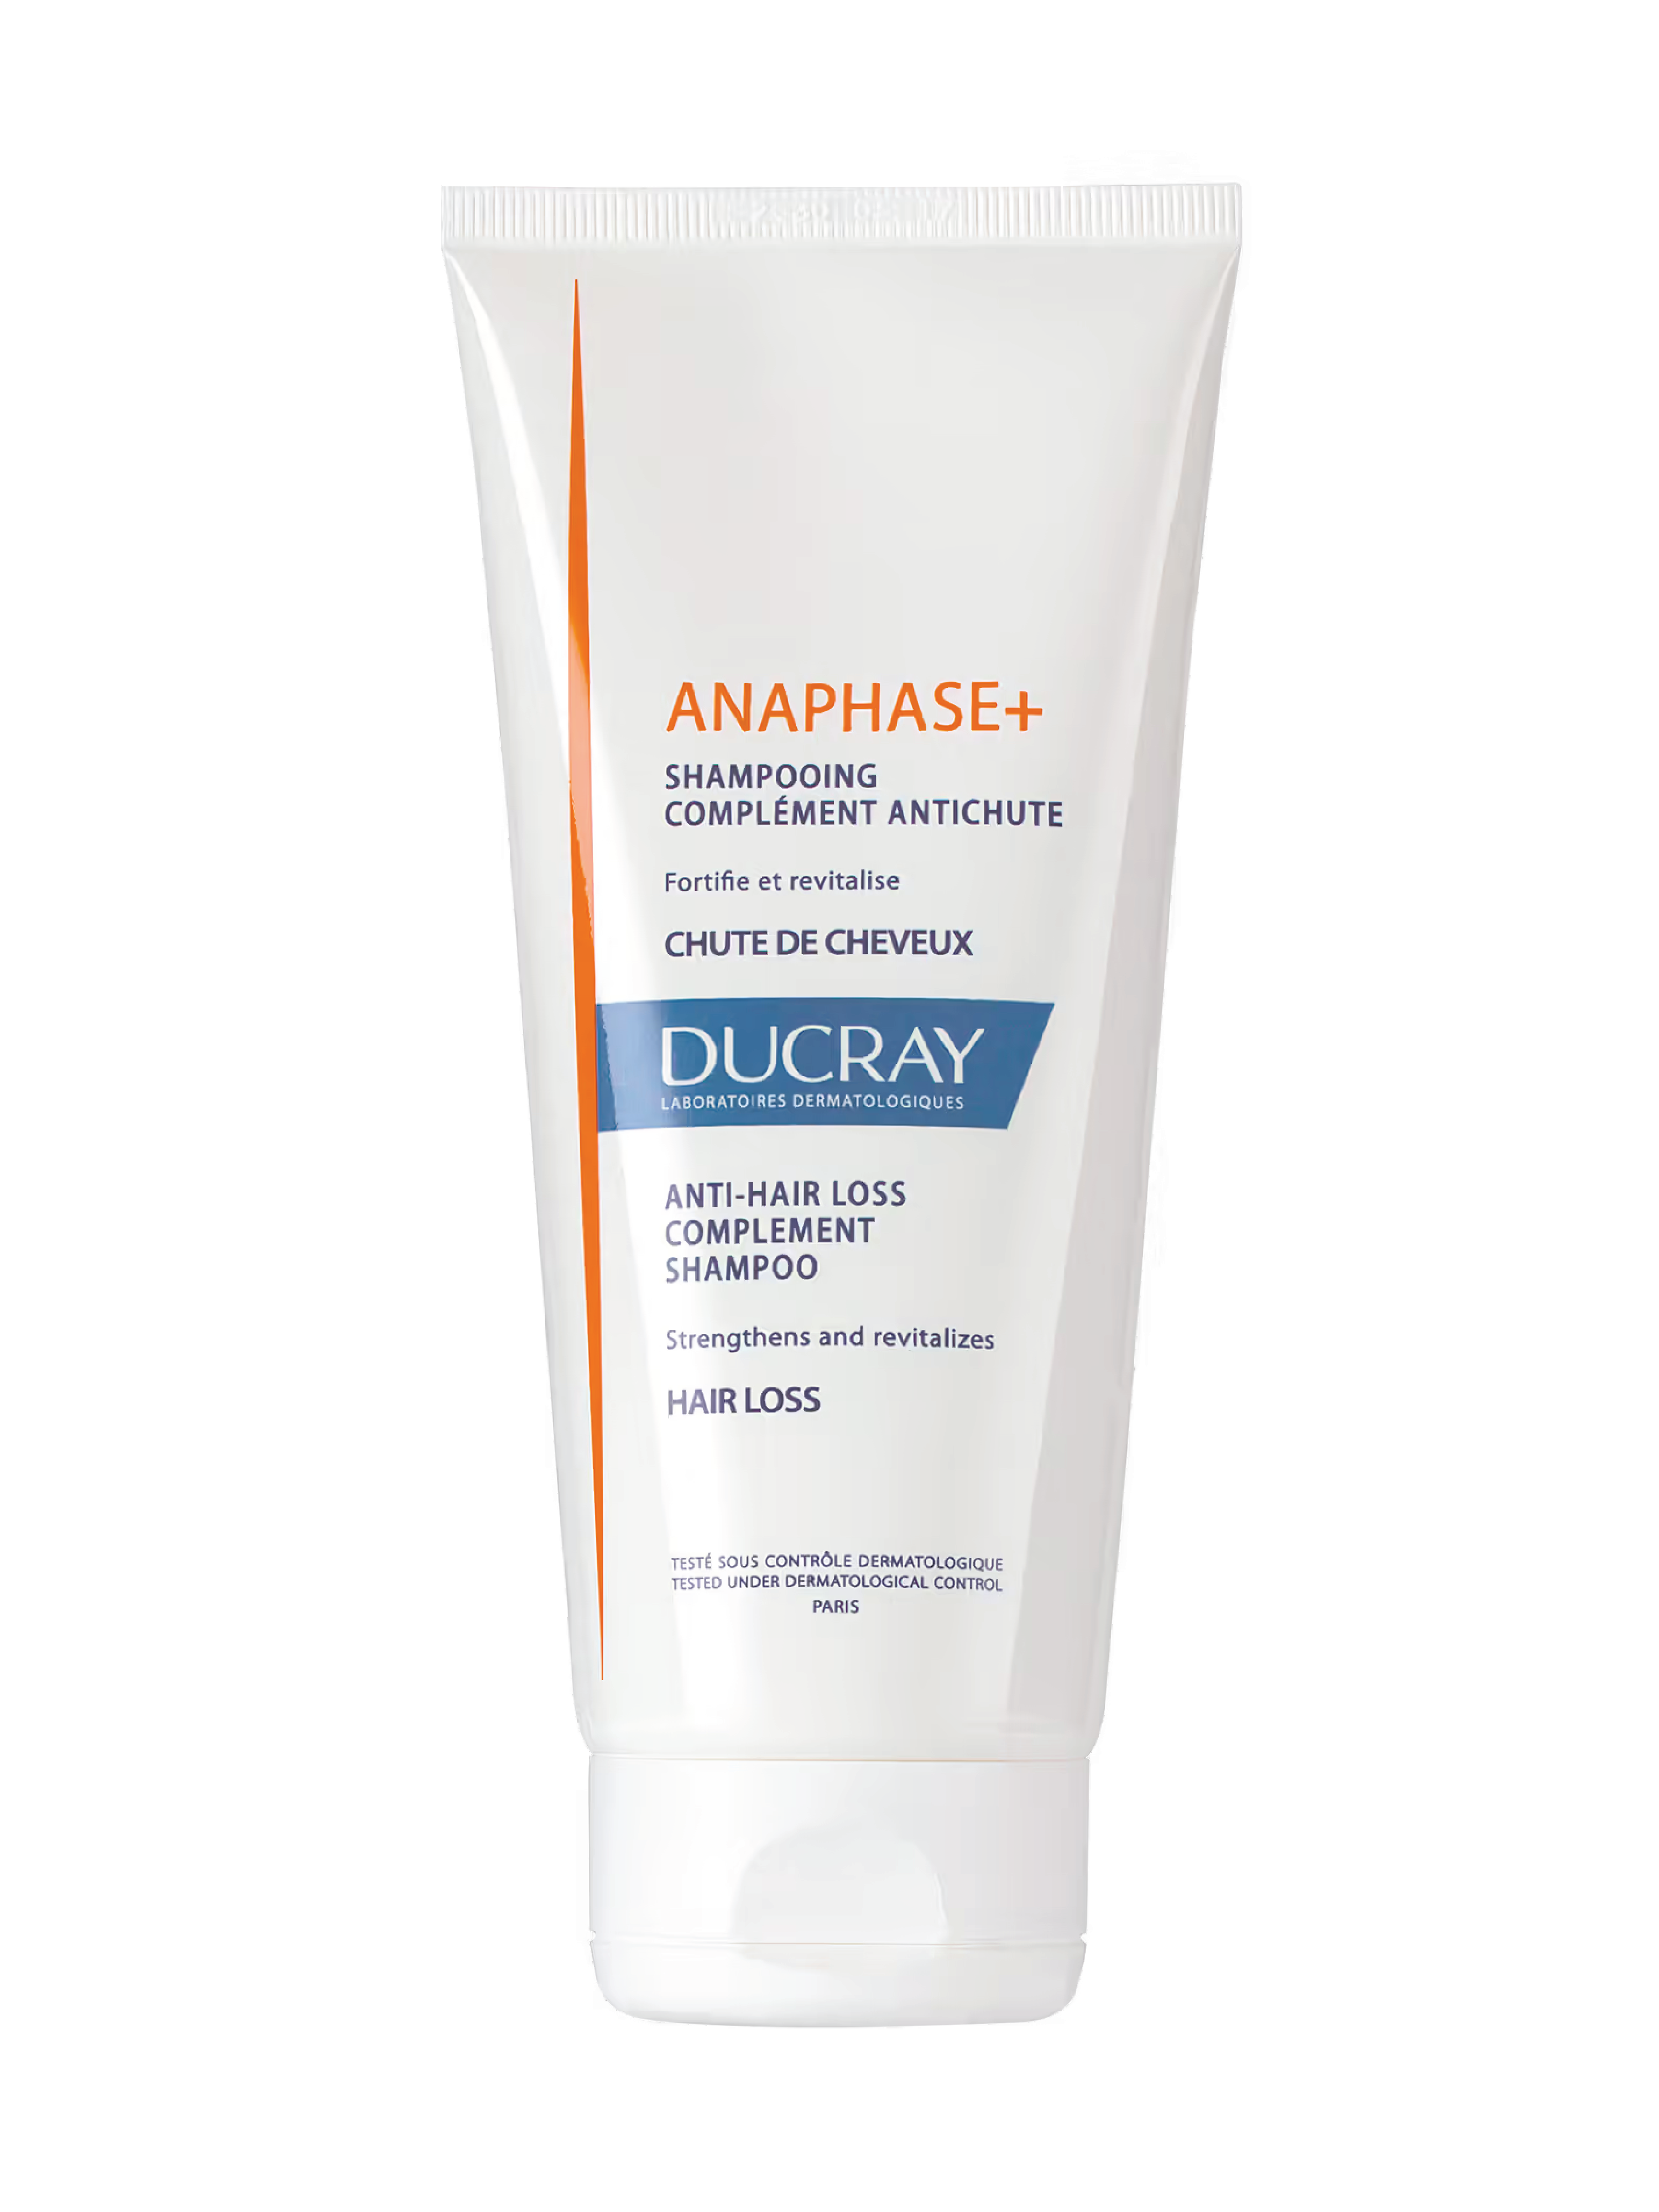 Ducray Anaphase+ Anti-Hairloss Complement Shampoo, 200 ml